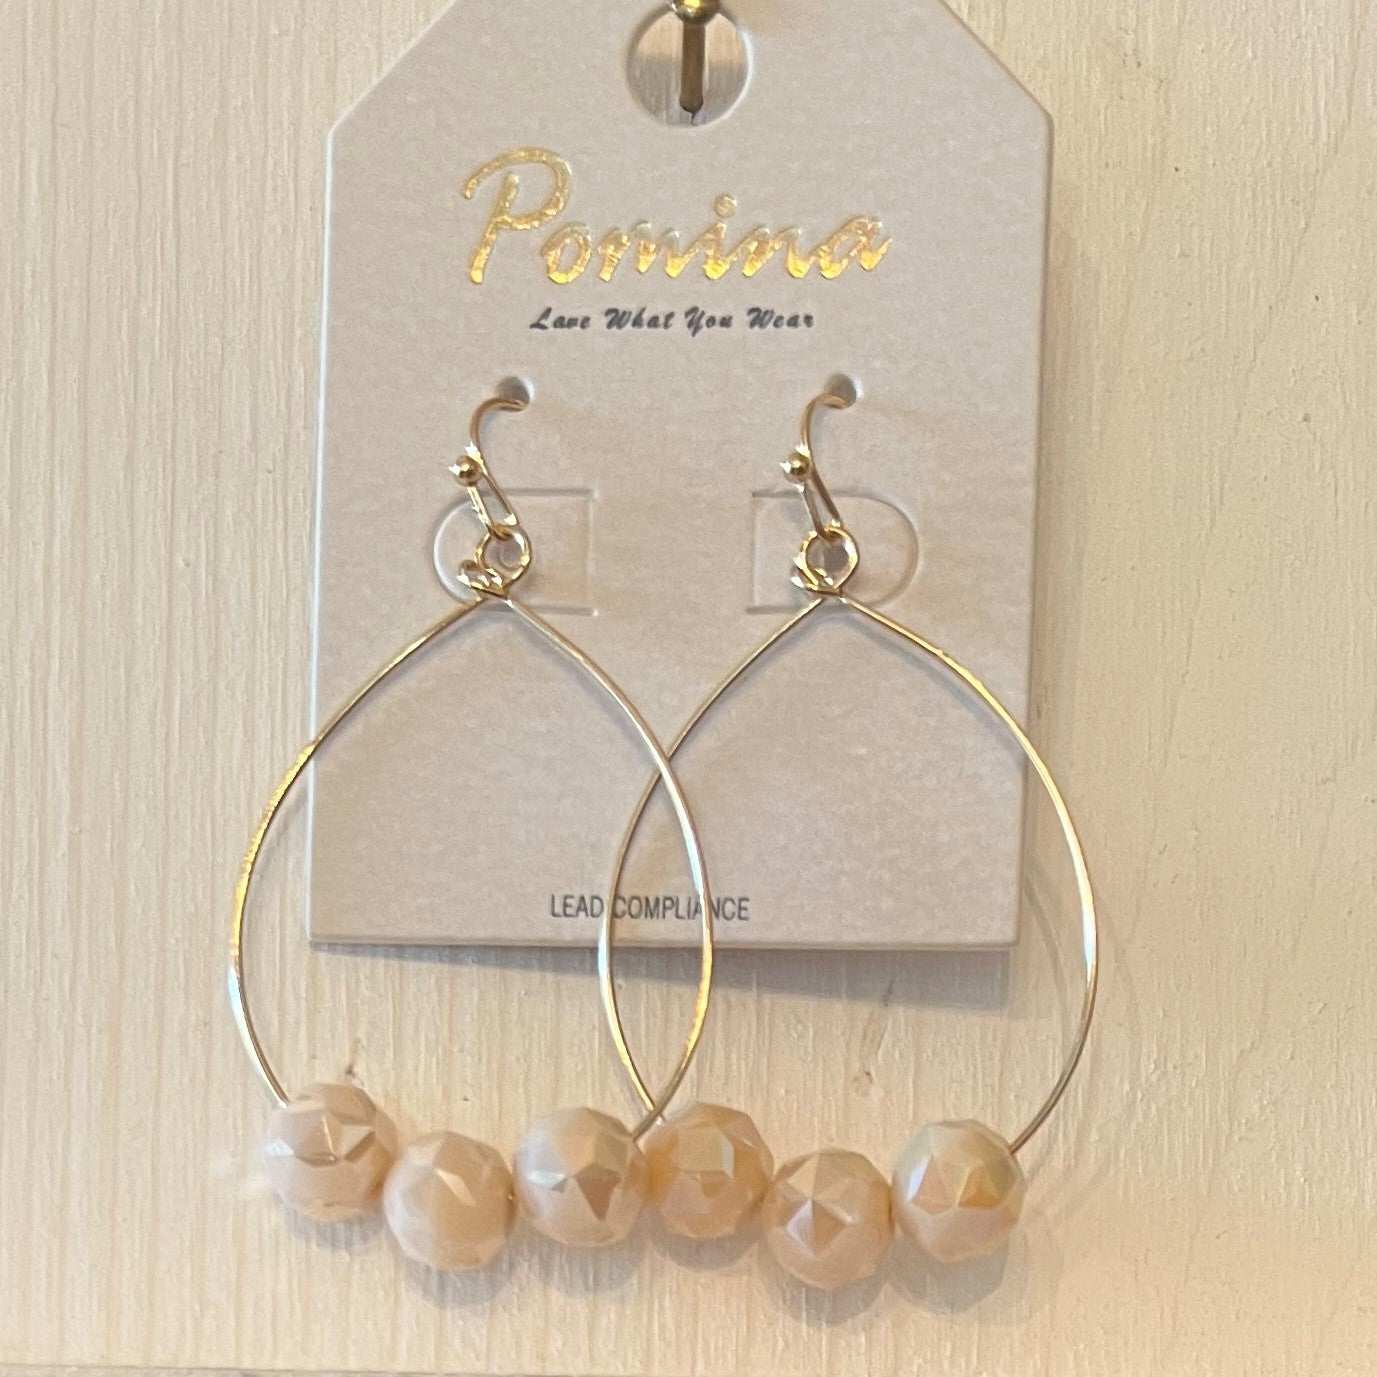 Teardrop-shaped Gold Earrings with Crystal Beads